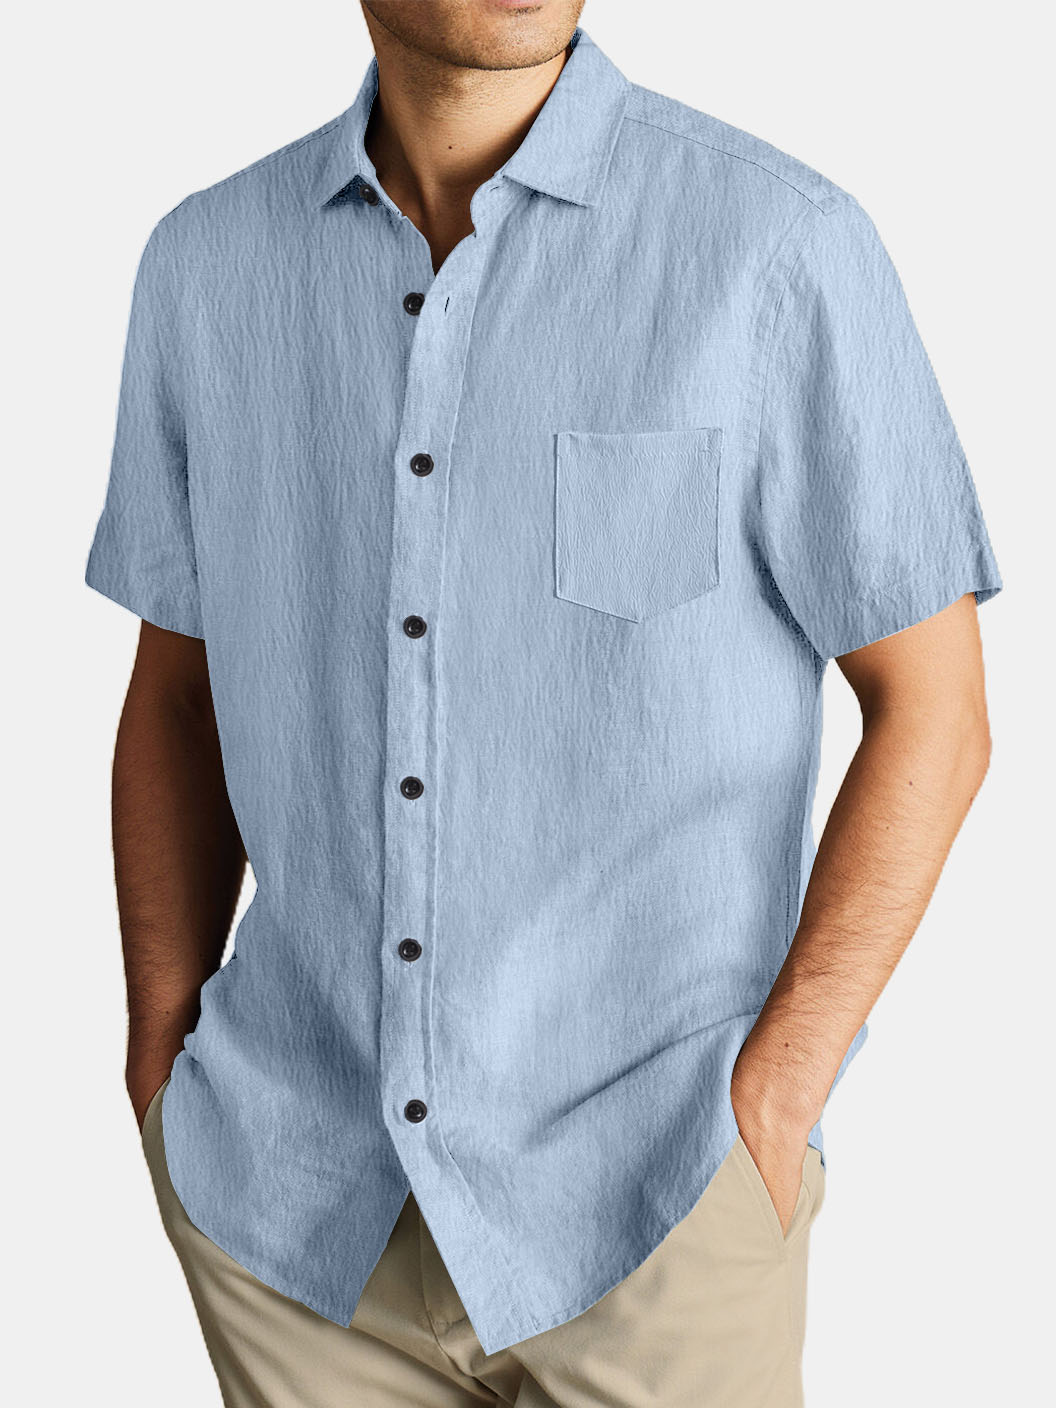 Men's Casual Basic Short Sleeved Shirt With Cotton And Linen Pockets